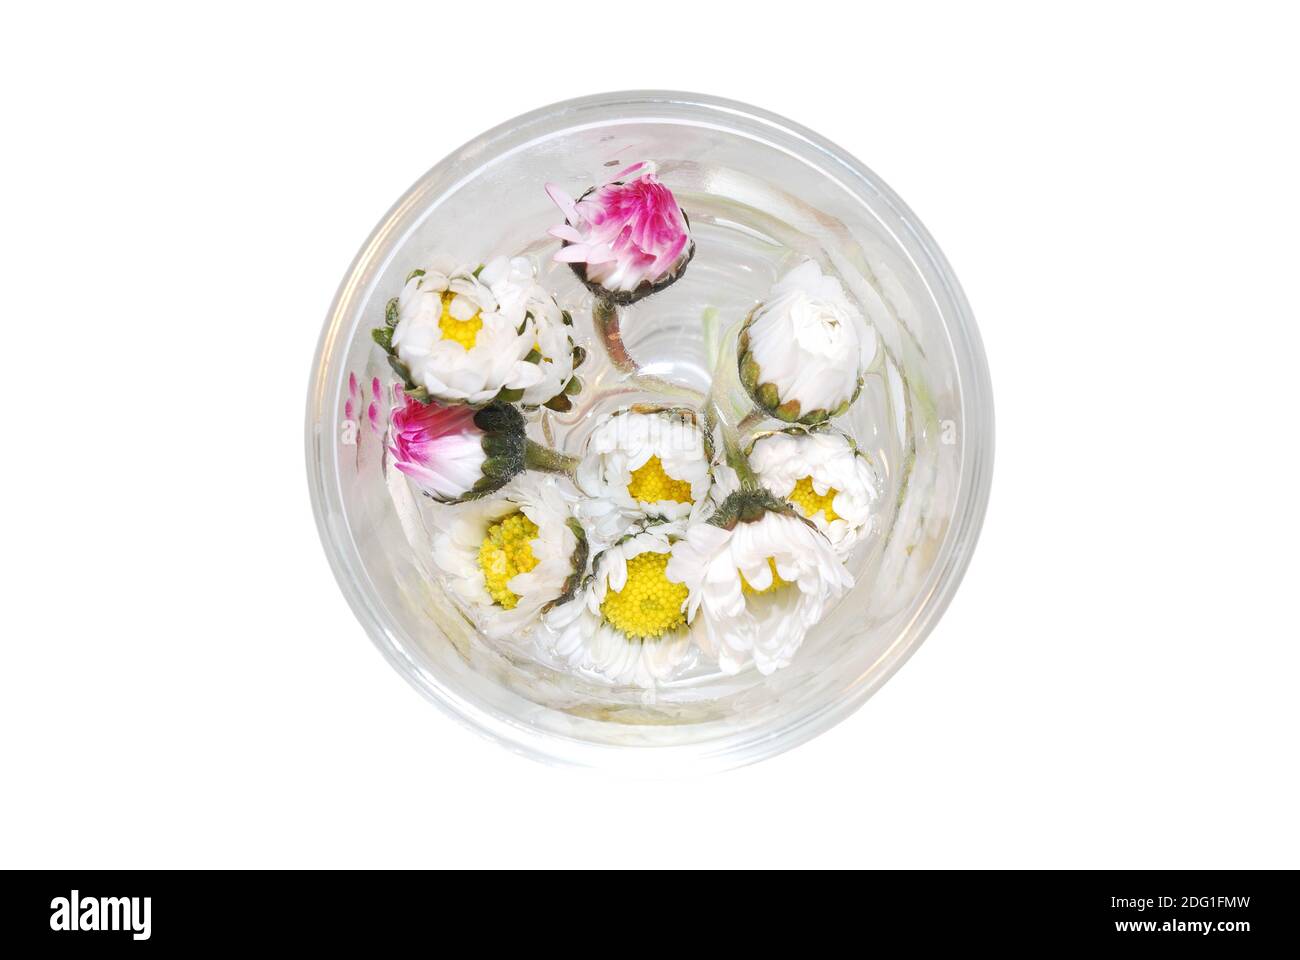 Goose flowers in glass from above Stock Photo